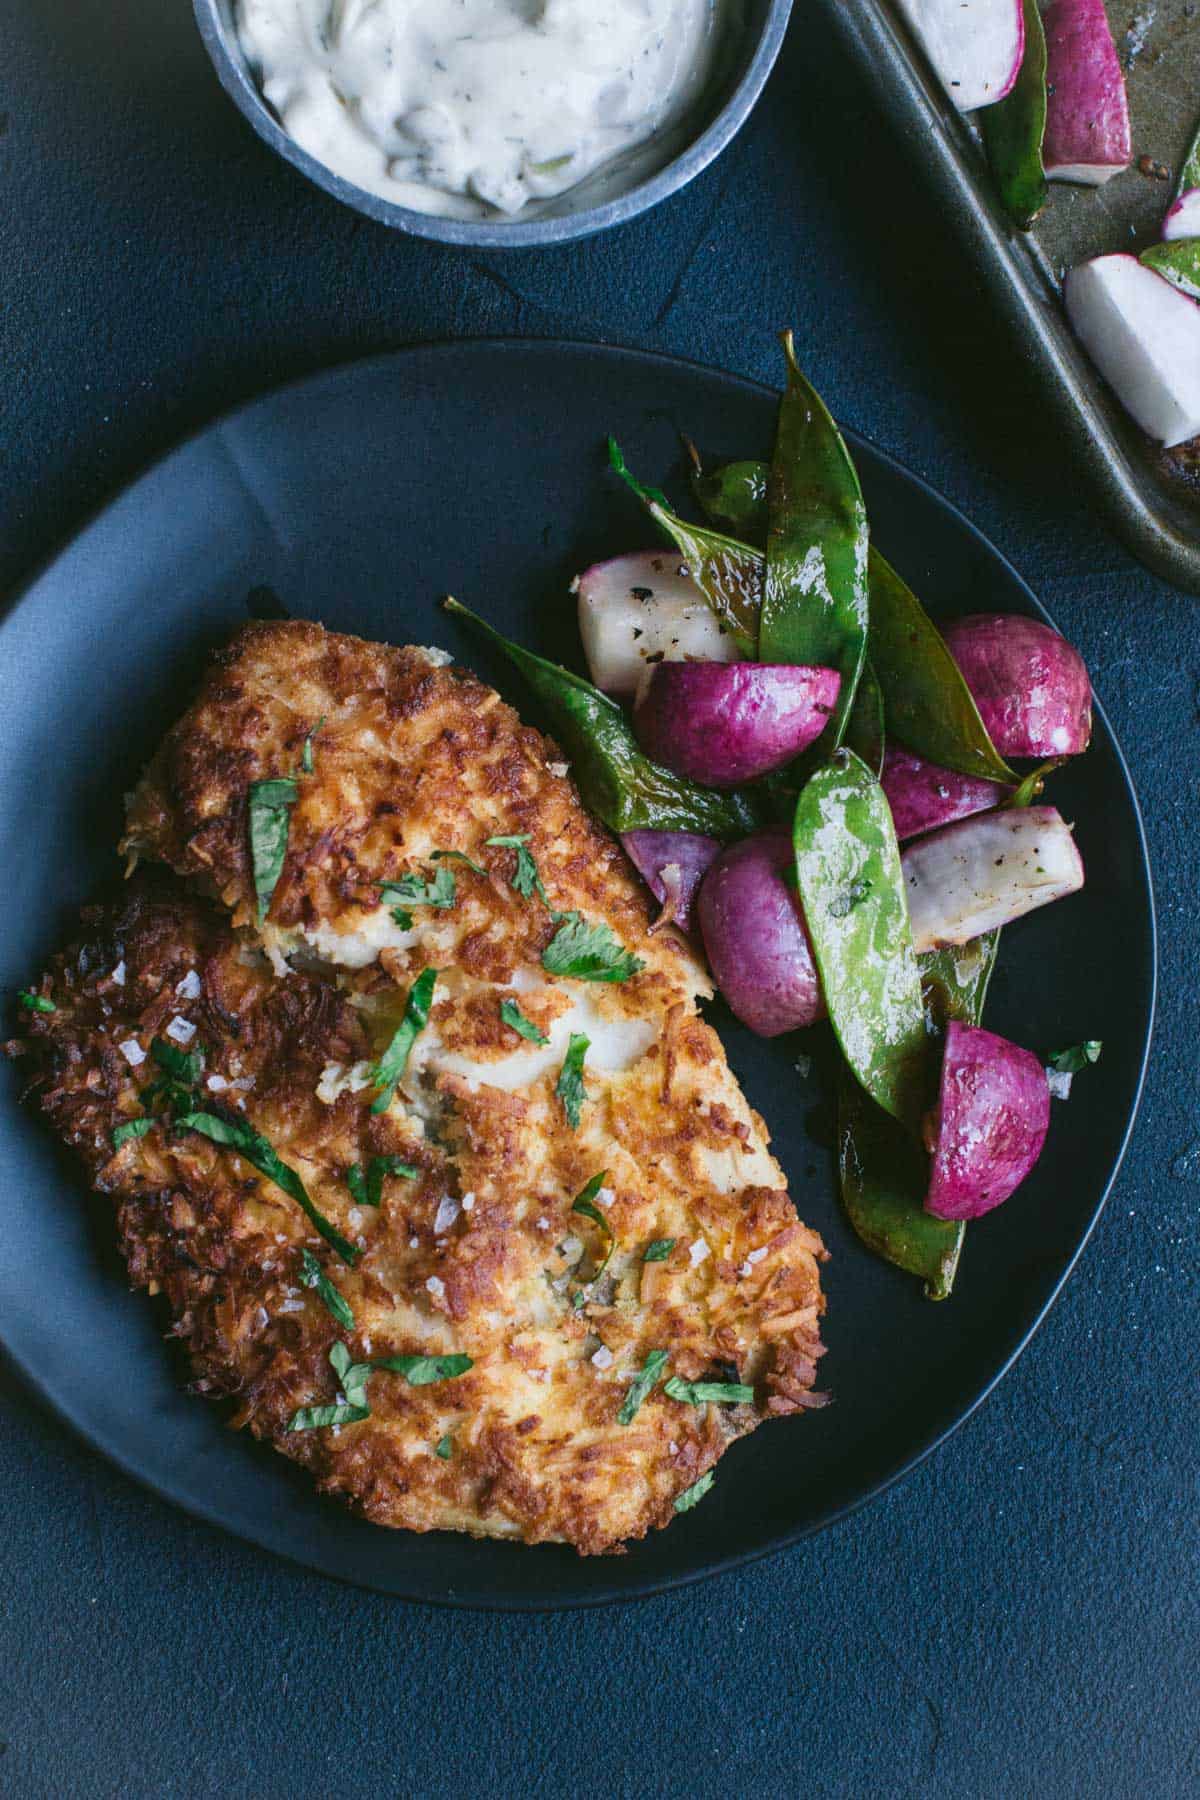 Keto Coconut Crusted Fish with Snap Peas and Radishes.